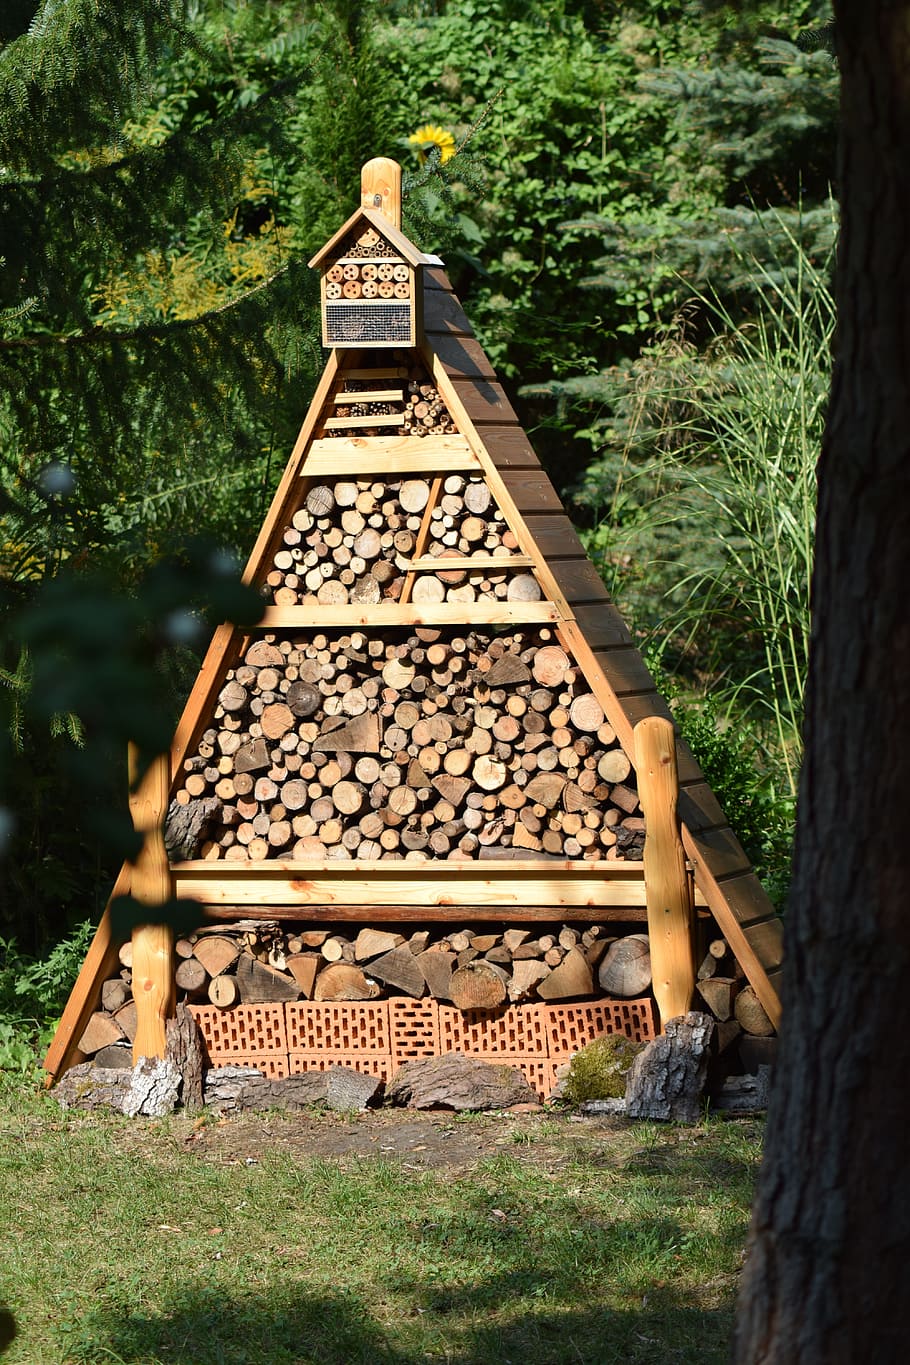 Garden, Insect Hotel, Nature, nature conservation, beehive, day, outdoors, tree, bee, plant